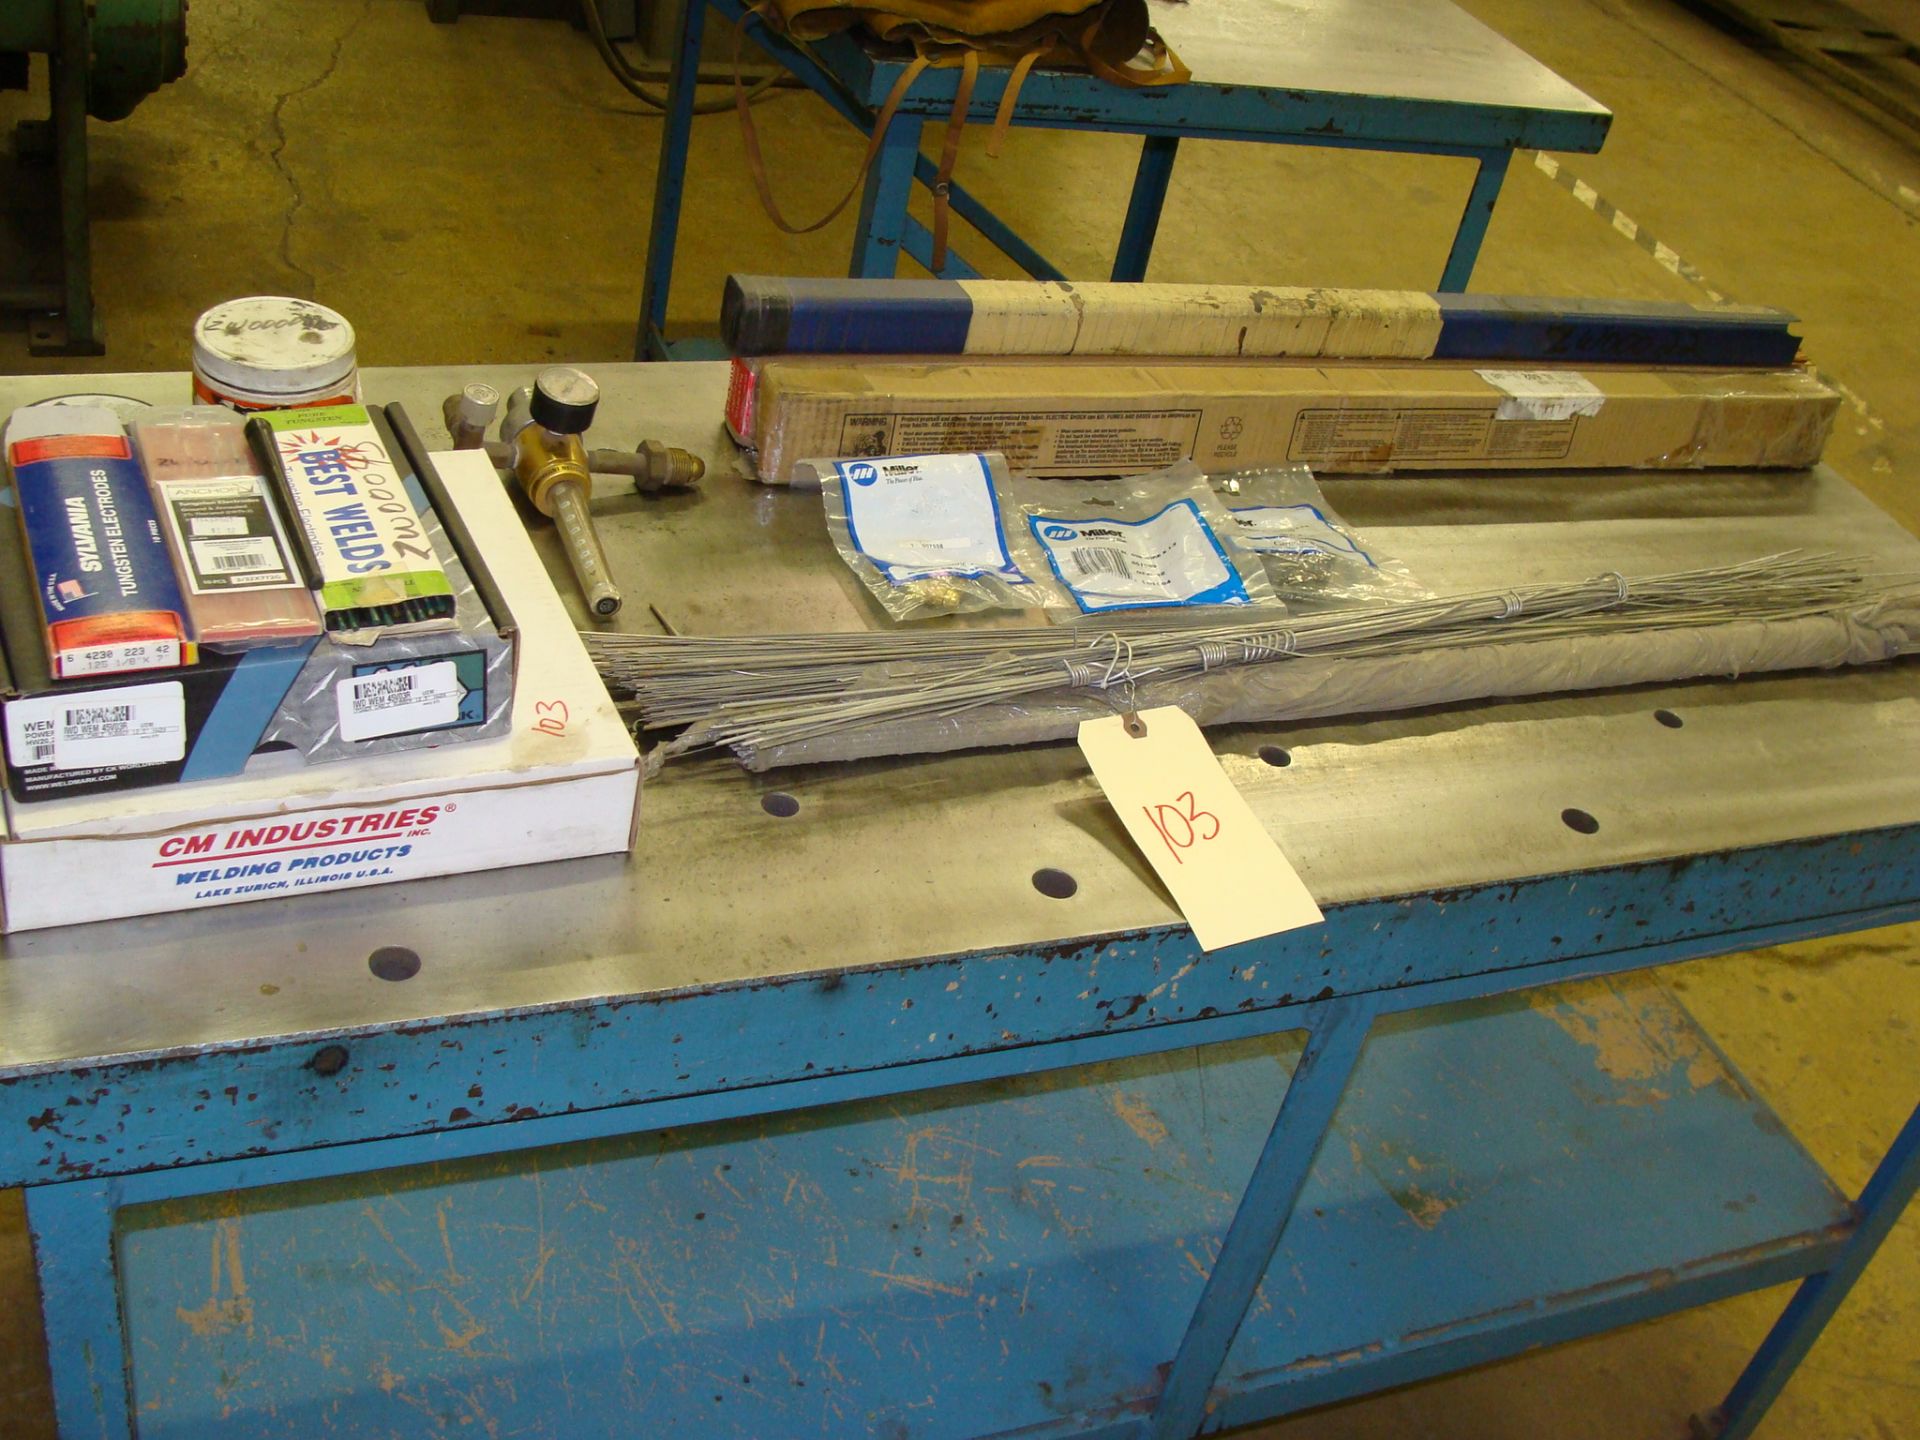 Welding Rod and Supplies